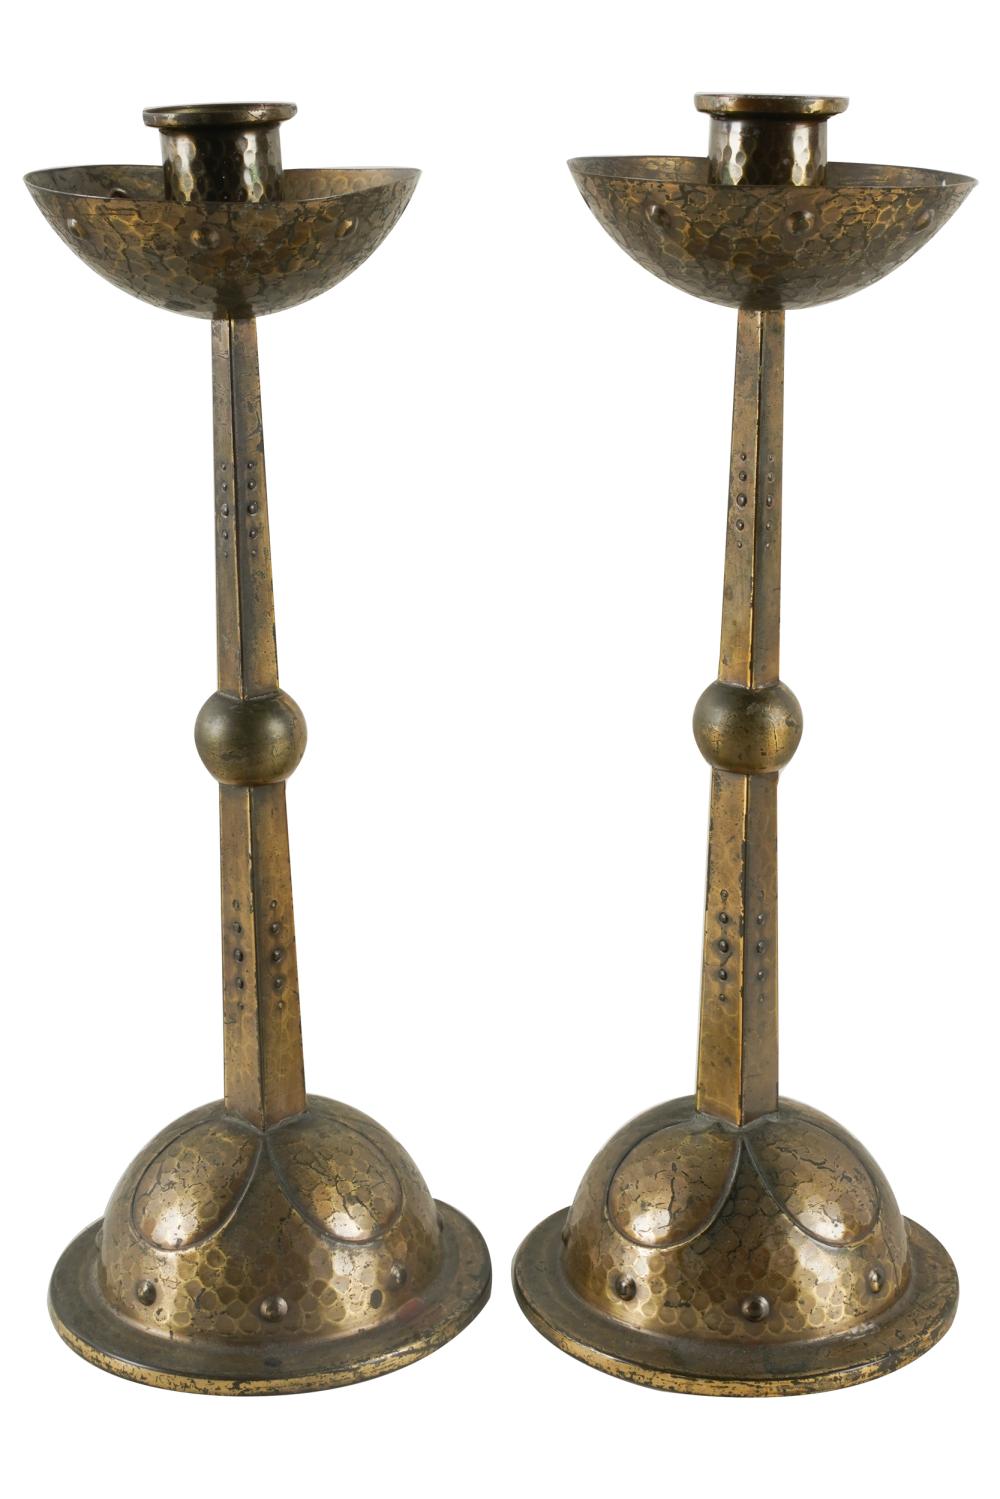 PAIR OF HAND HAMMERED COPPER CANDLESTICKS10